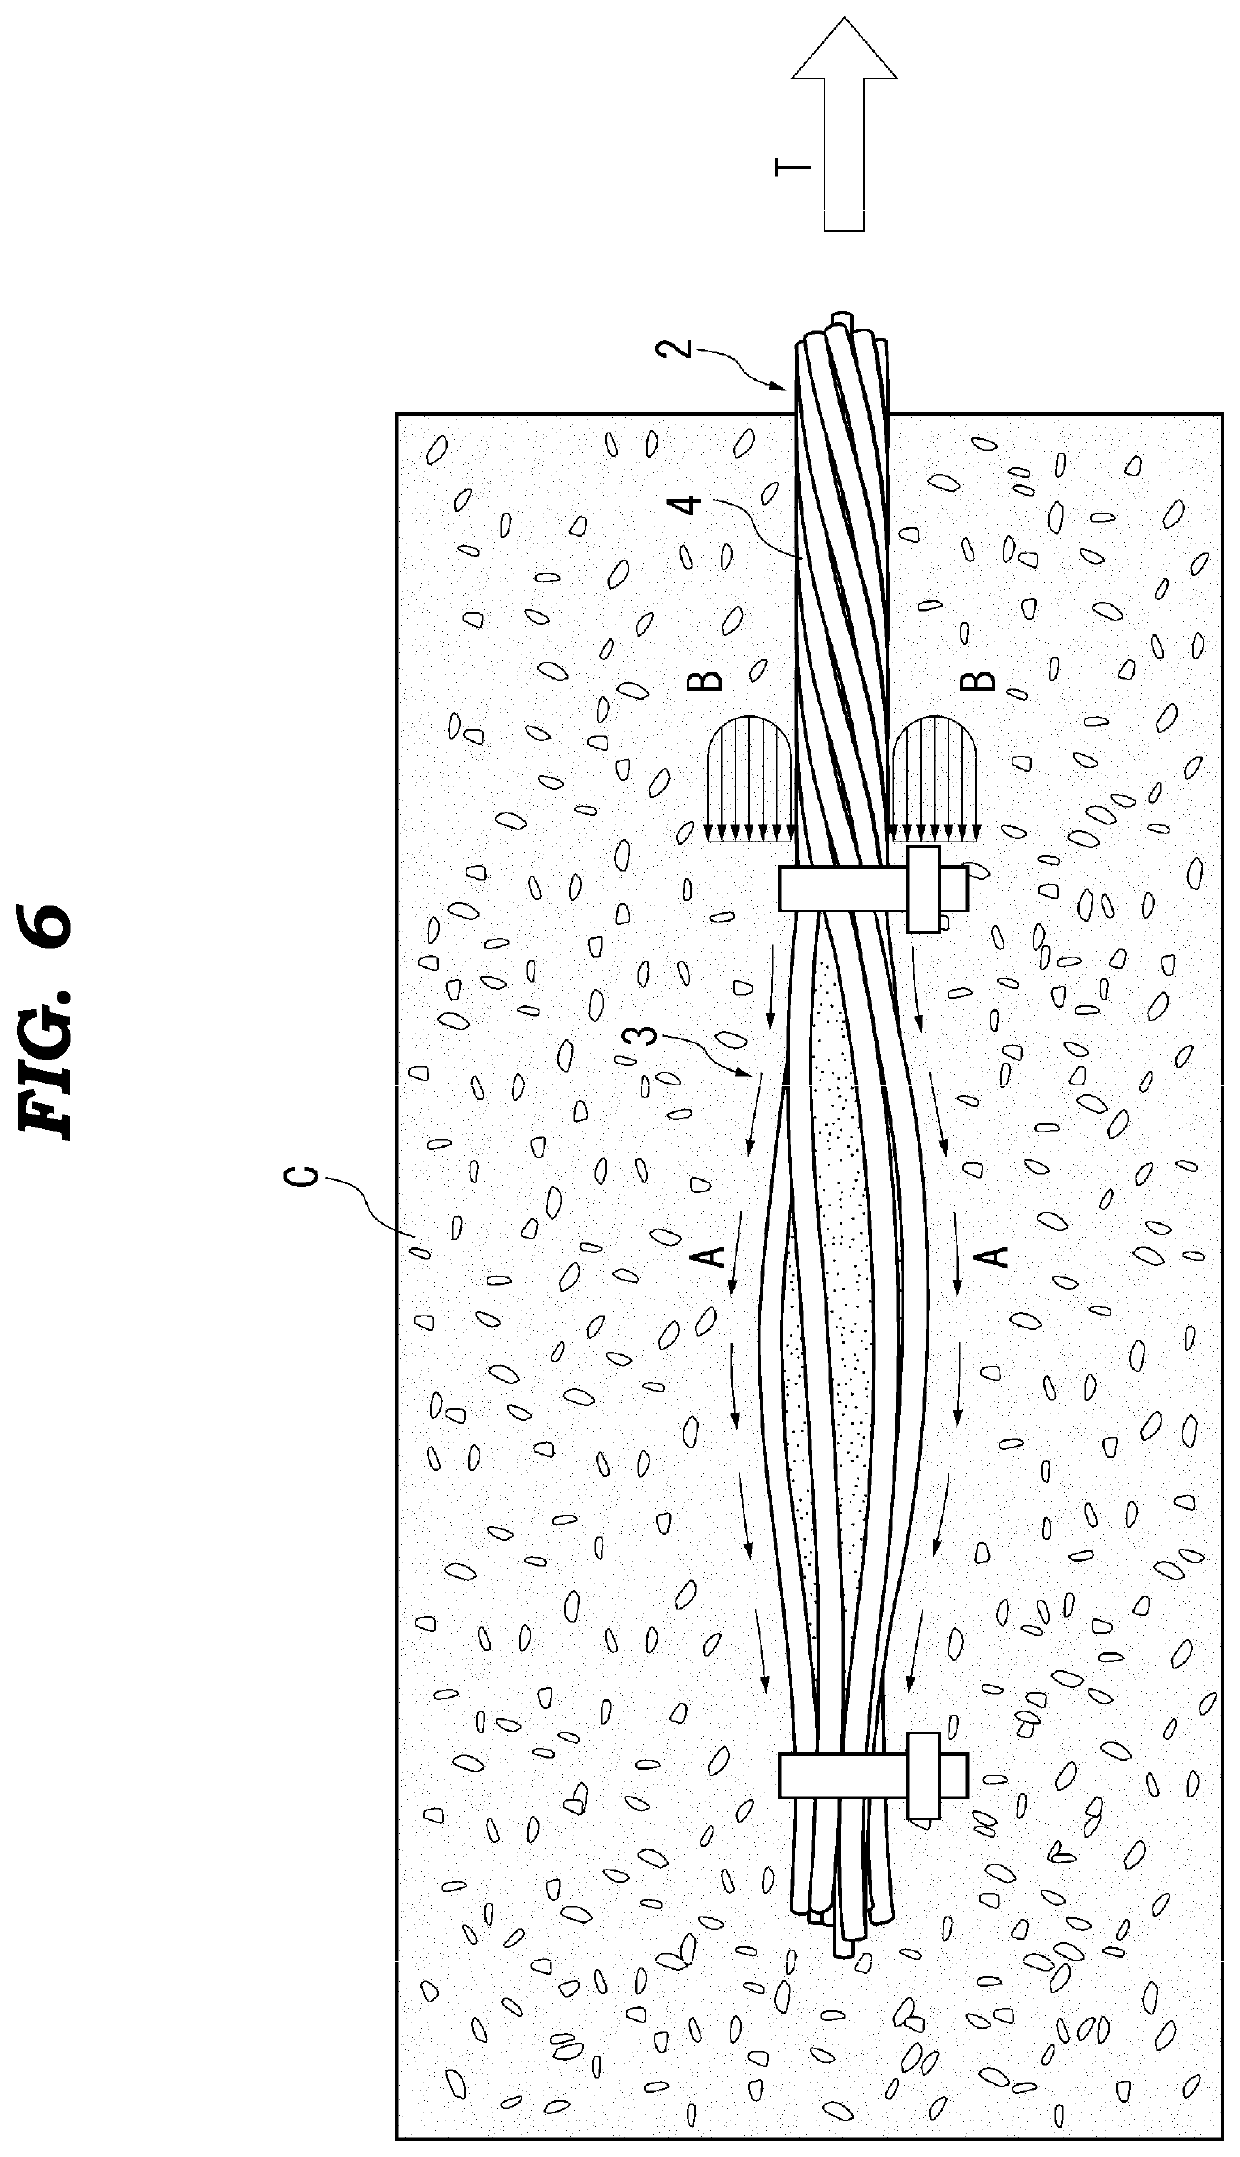 Anchorage of continuous fiber-reinforced polymer strands